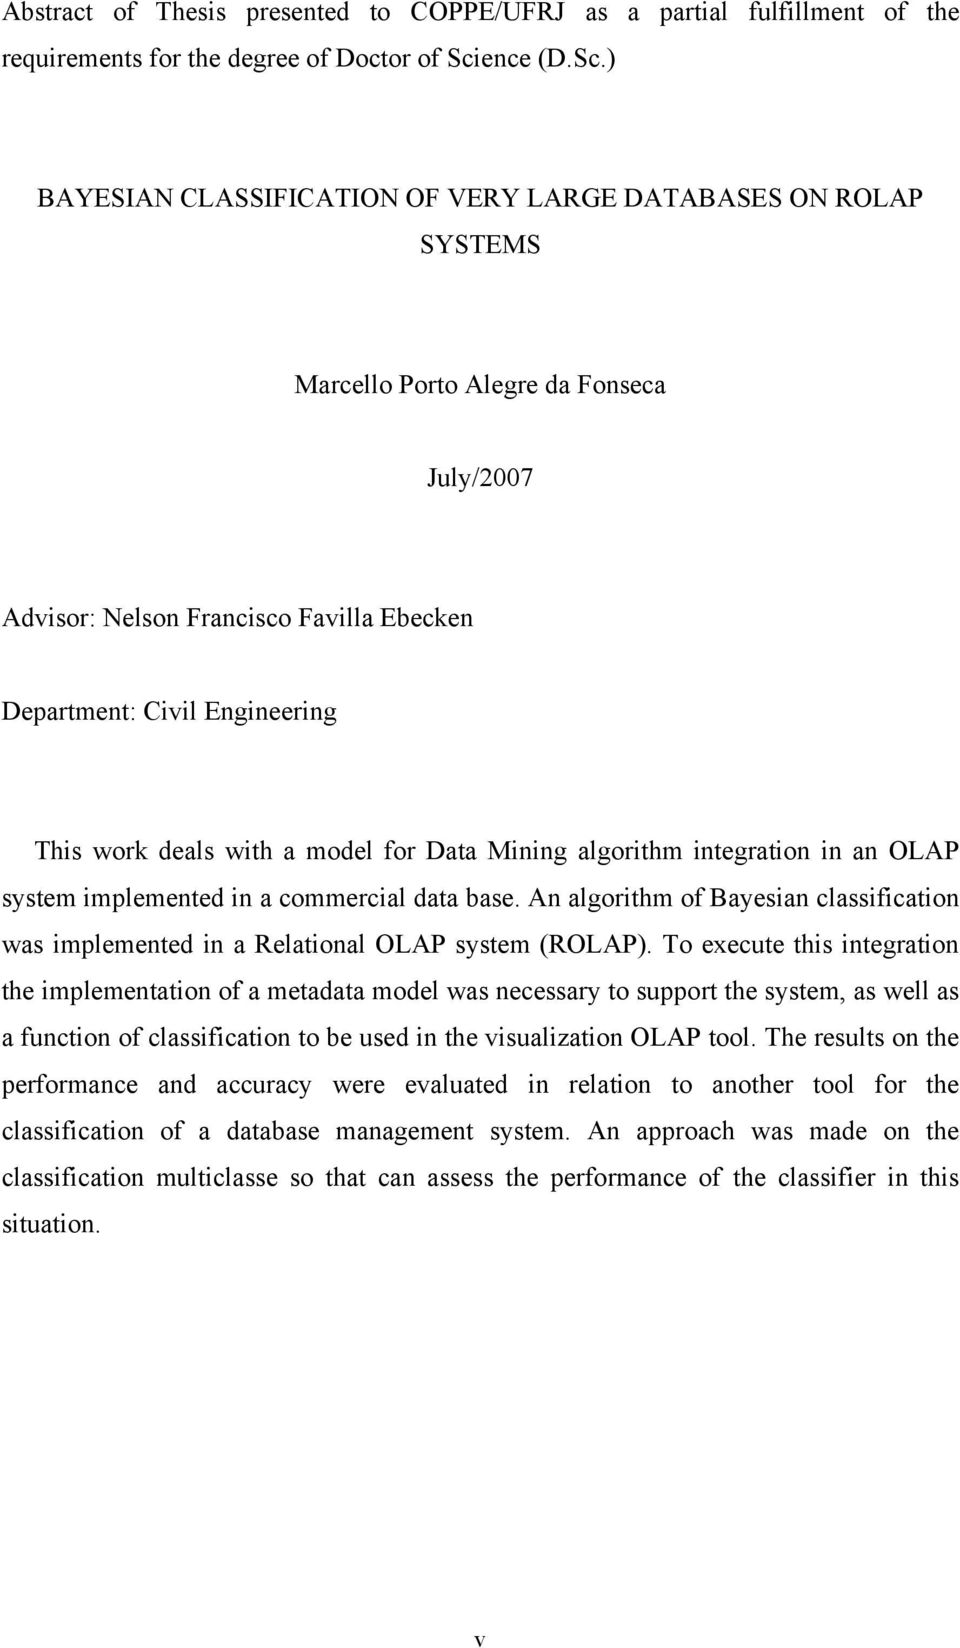 ) BAYESIAN CLASSIFICATION OF VERY LARGE DATABASES ON ROLAP SYSTEMS Marcello Porto Alegre da Fonseca July/2007 Advisor: Nelson Francisco Favilla Ebecken Department: Civil Engineering This work deals